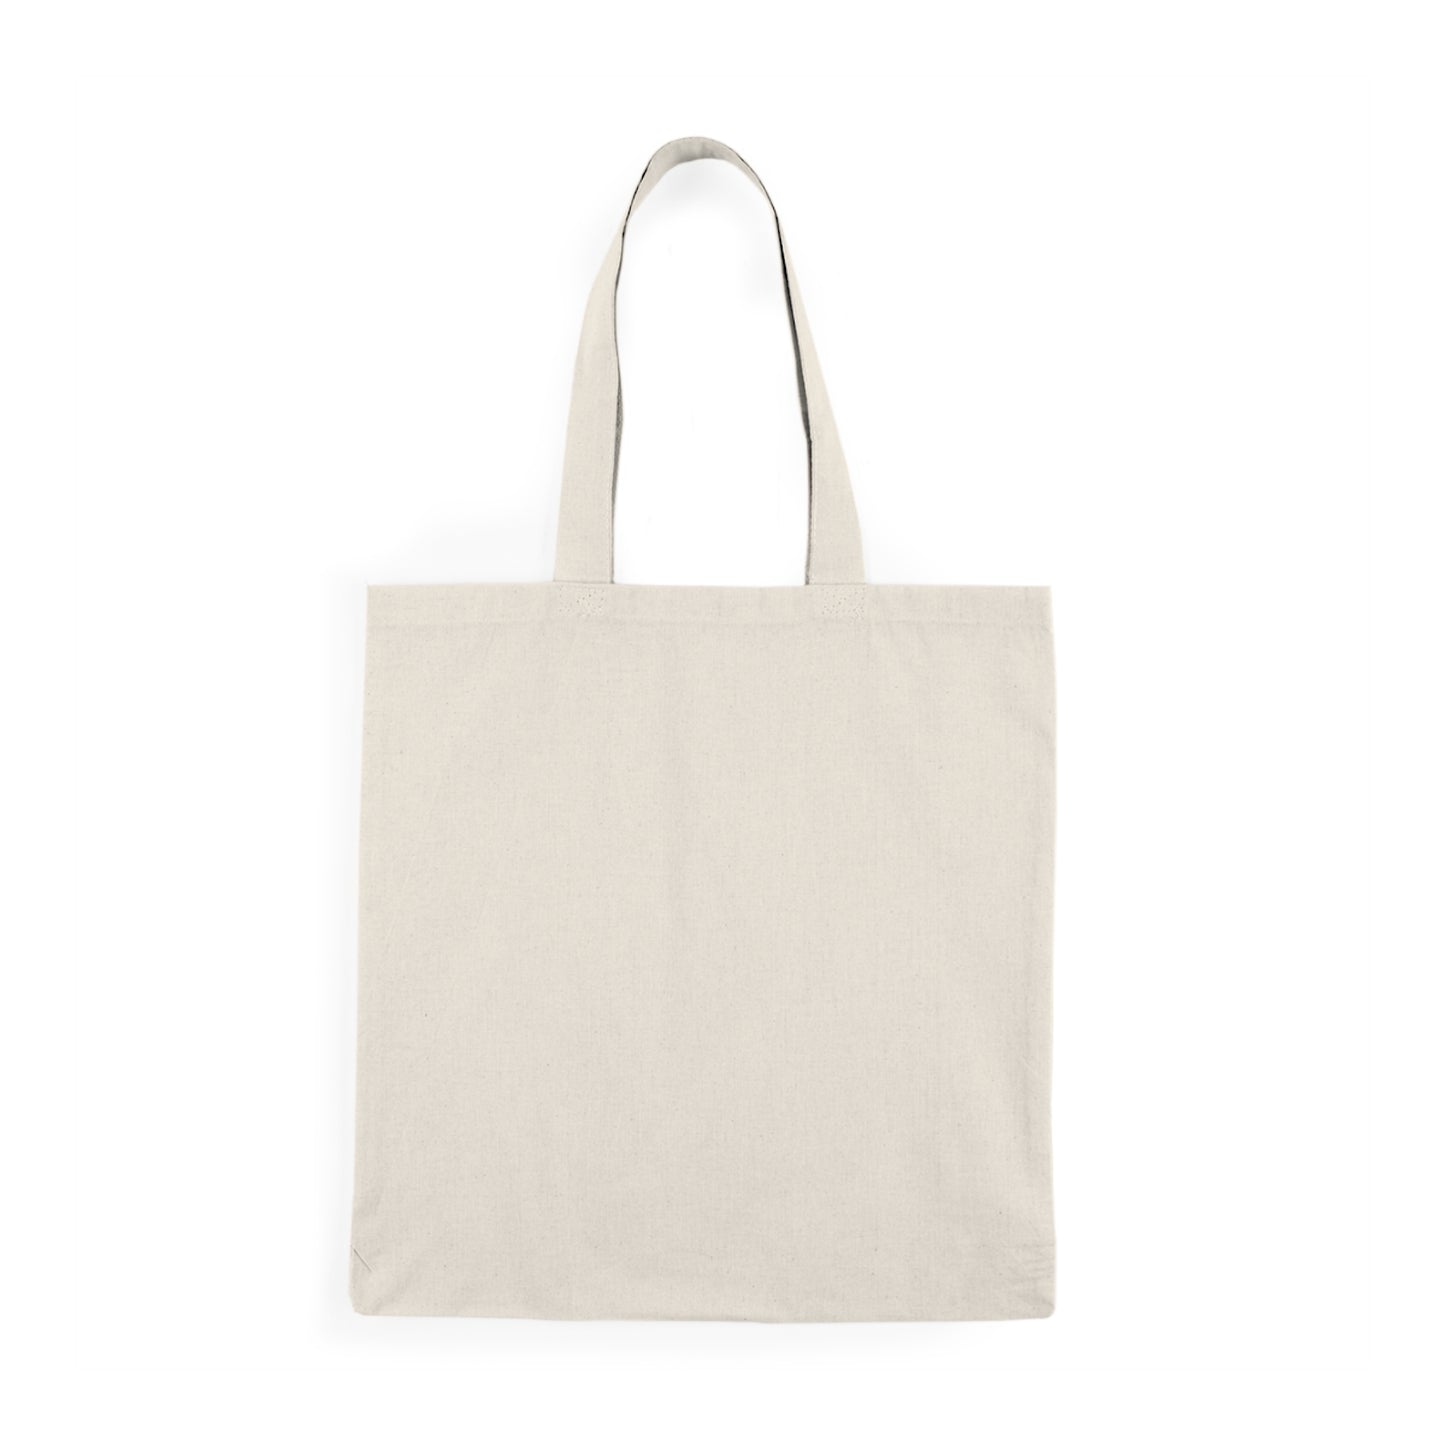 DO WHAT MAKES YOUR SOUL HAPPY Natural Tote Bag